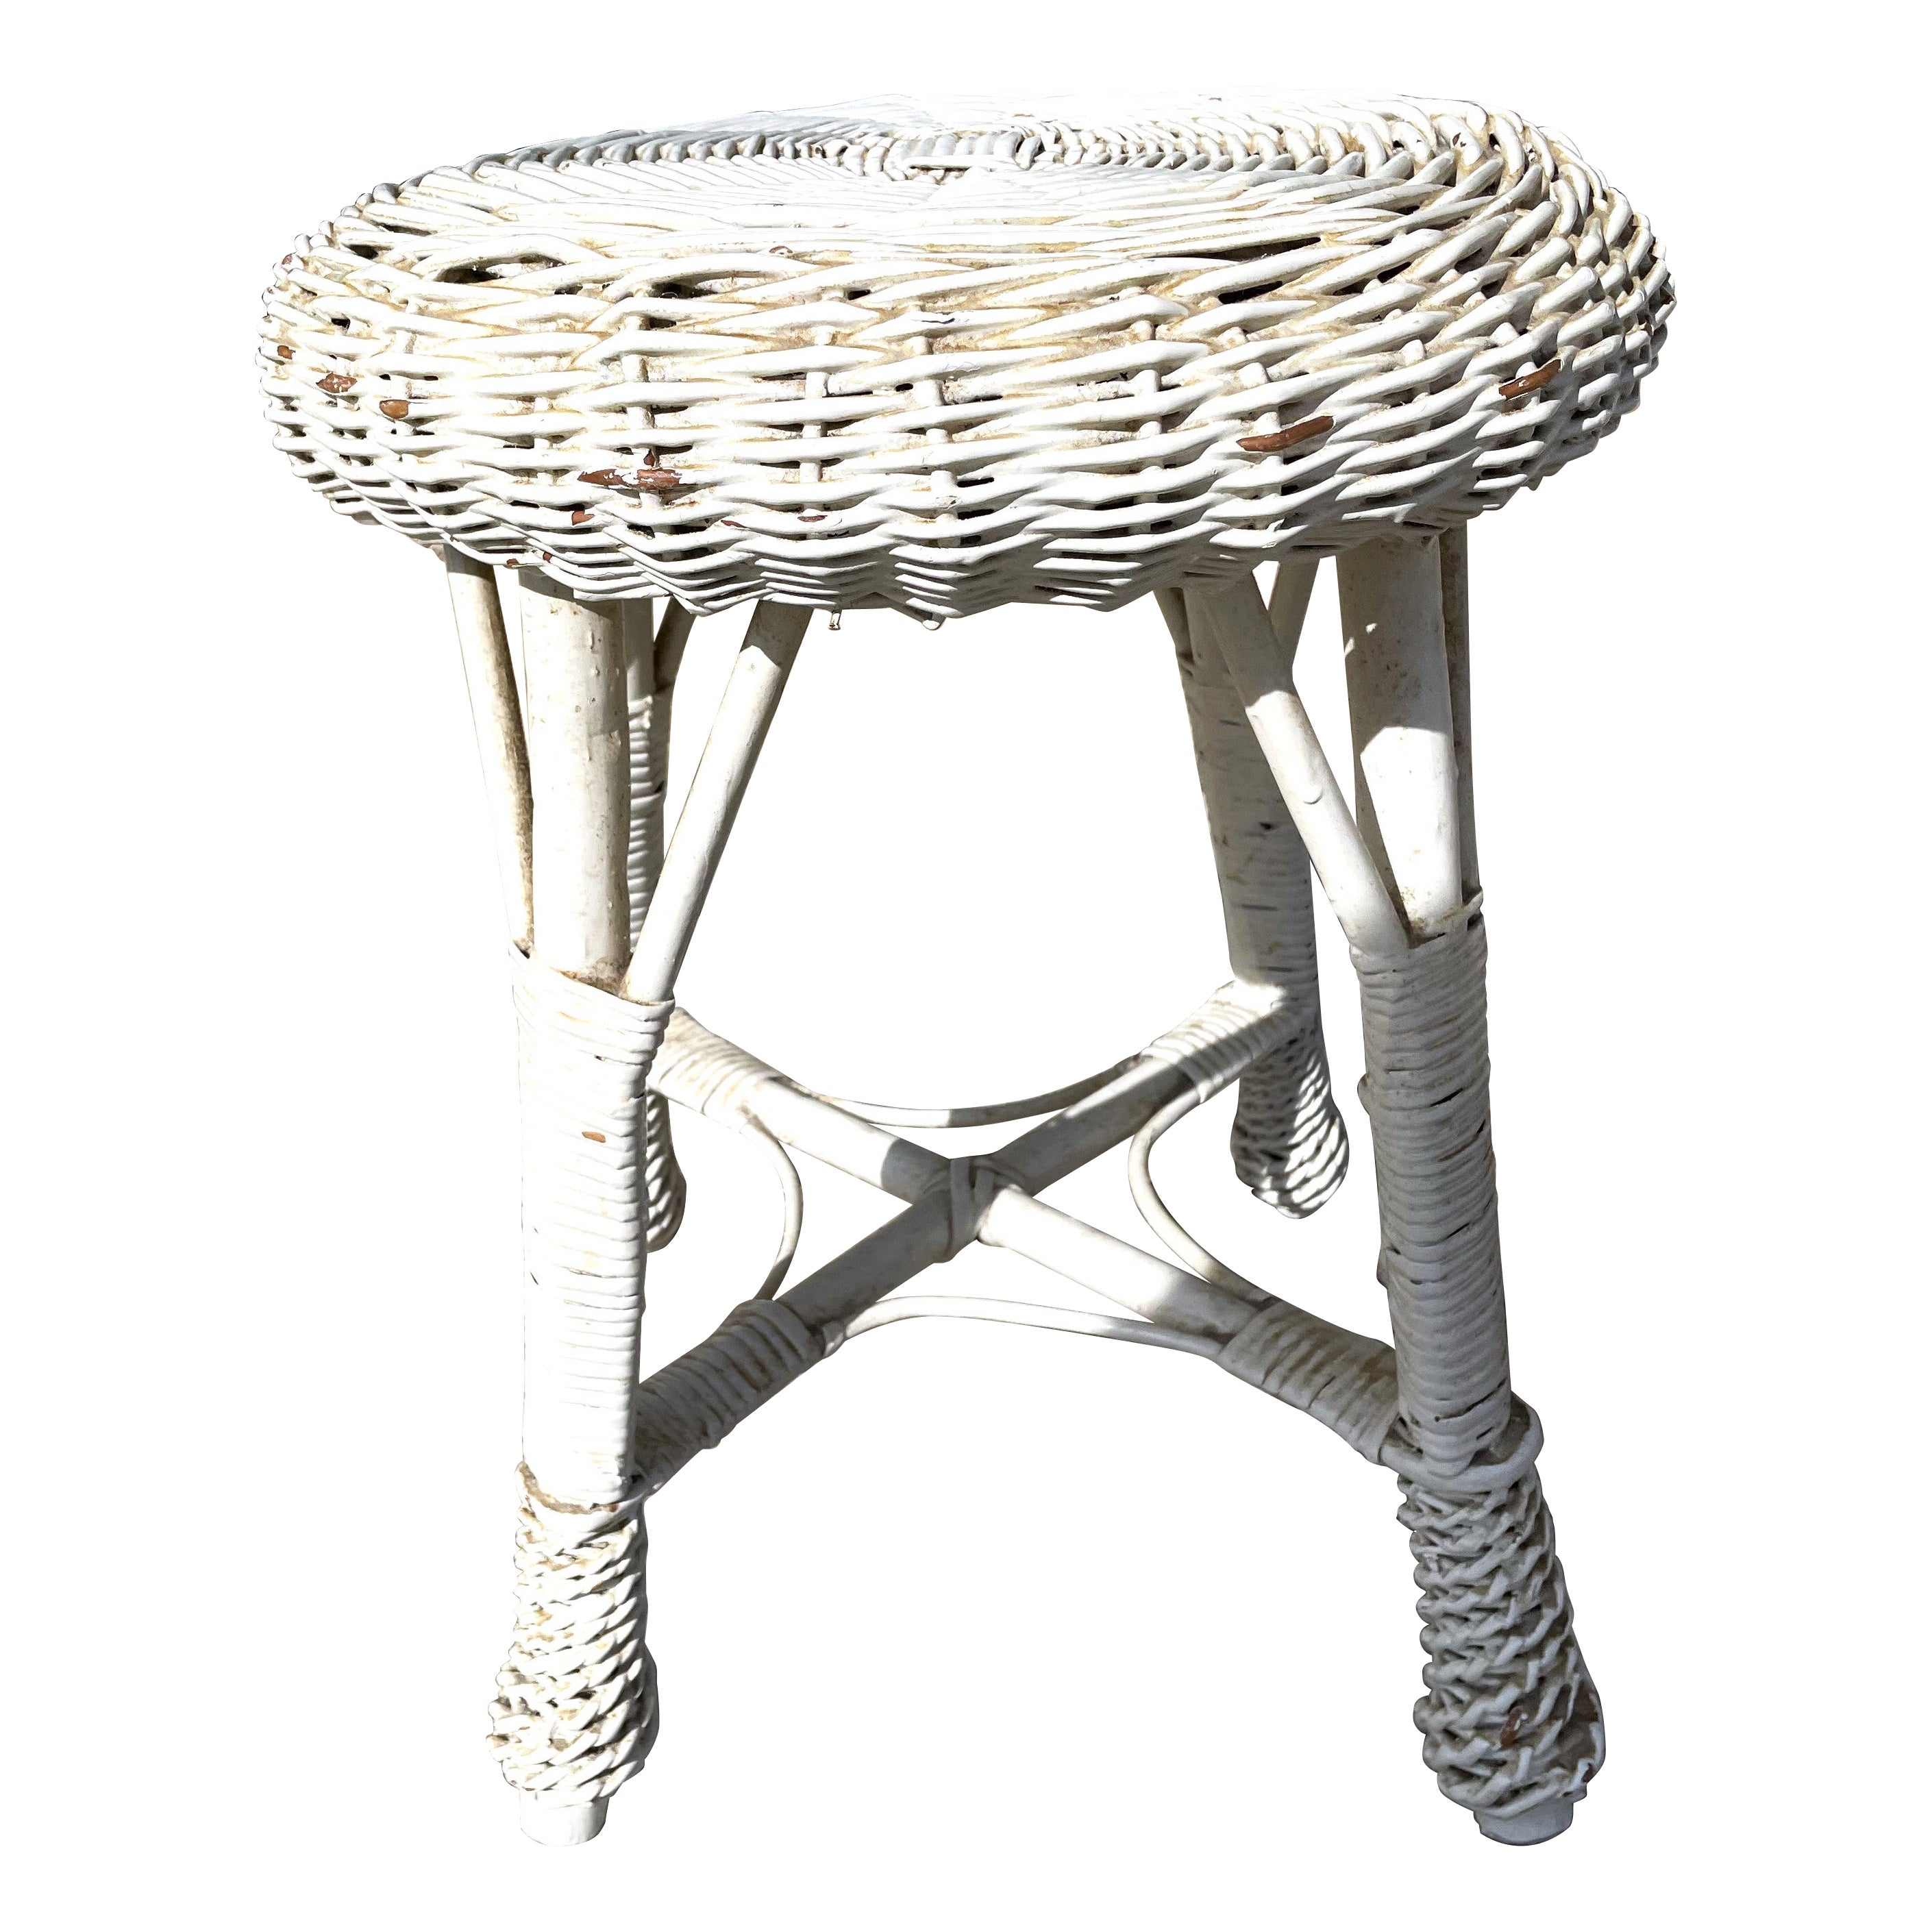 White Wicker/Rattan Drink/Plant Stand/Table or Vanity/Bohemian Stool For Sale